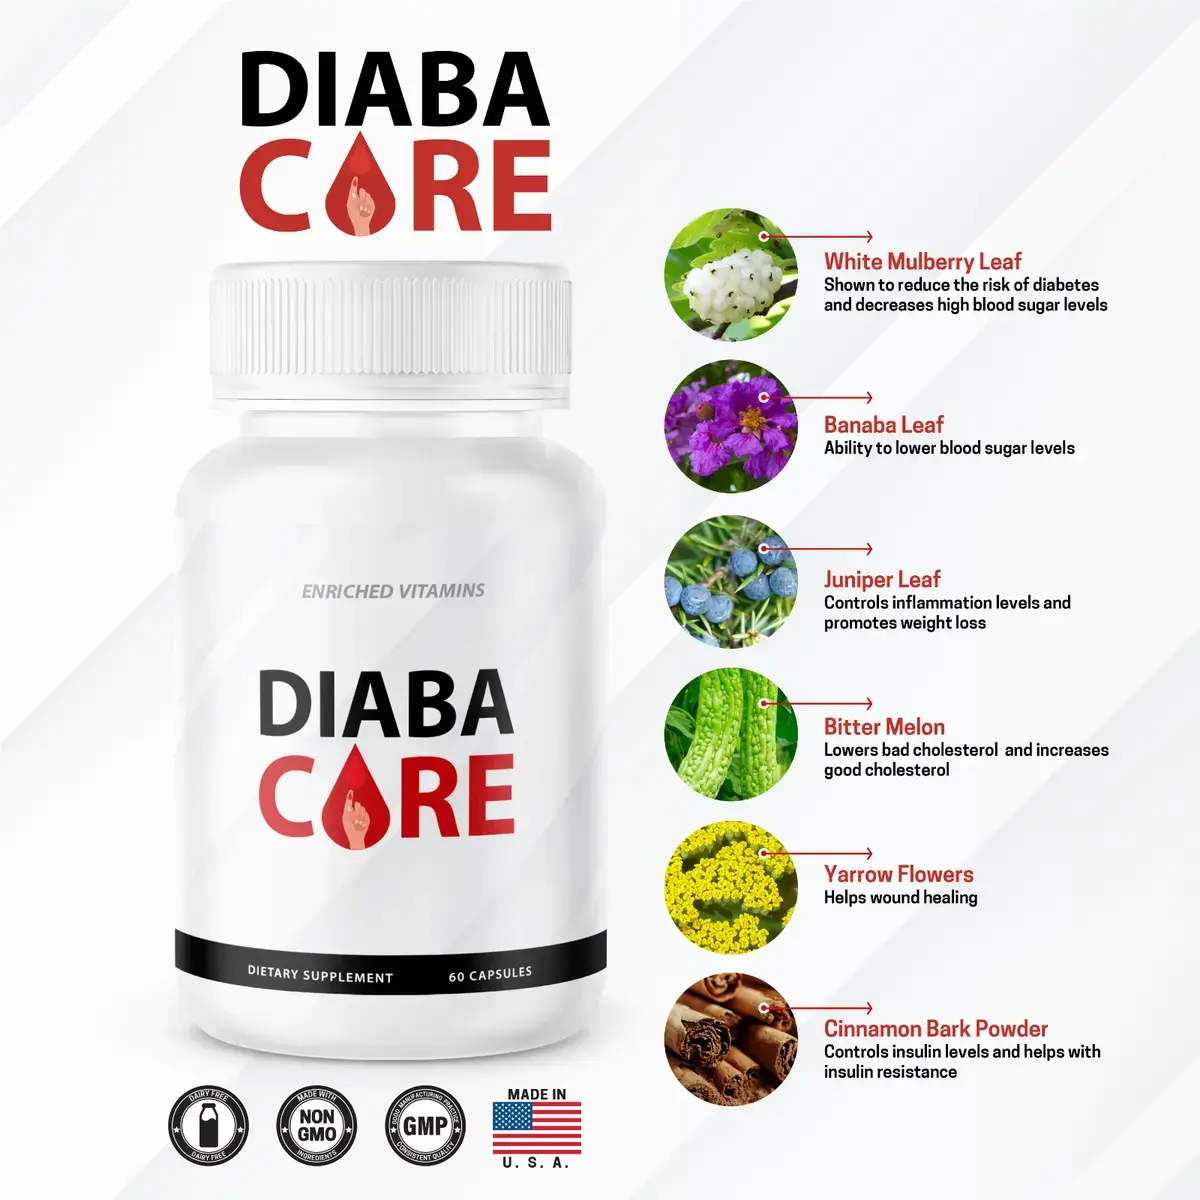 What Are The Ingredients Of Using Diabacore Supplement